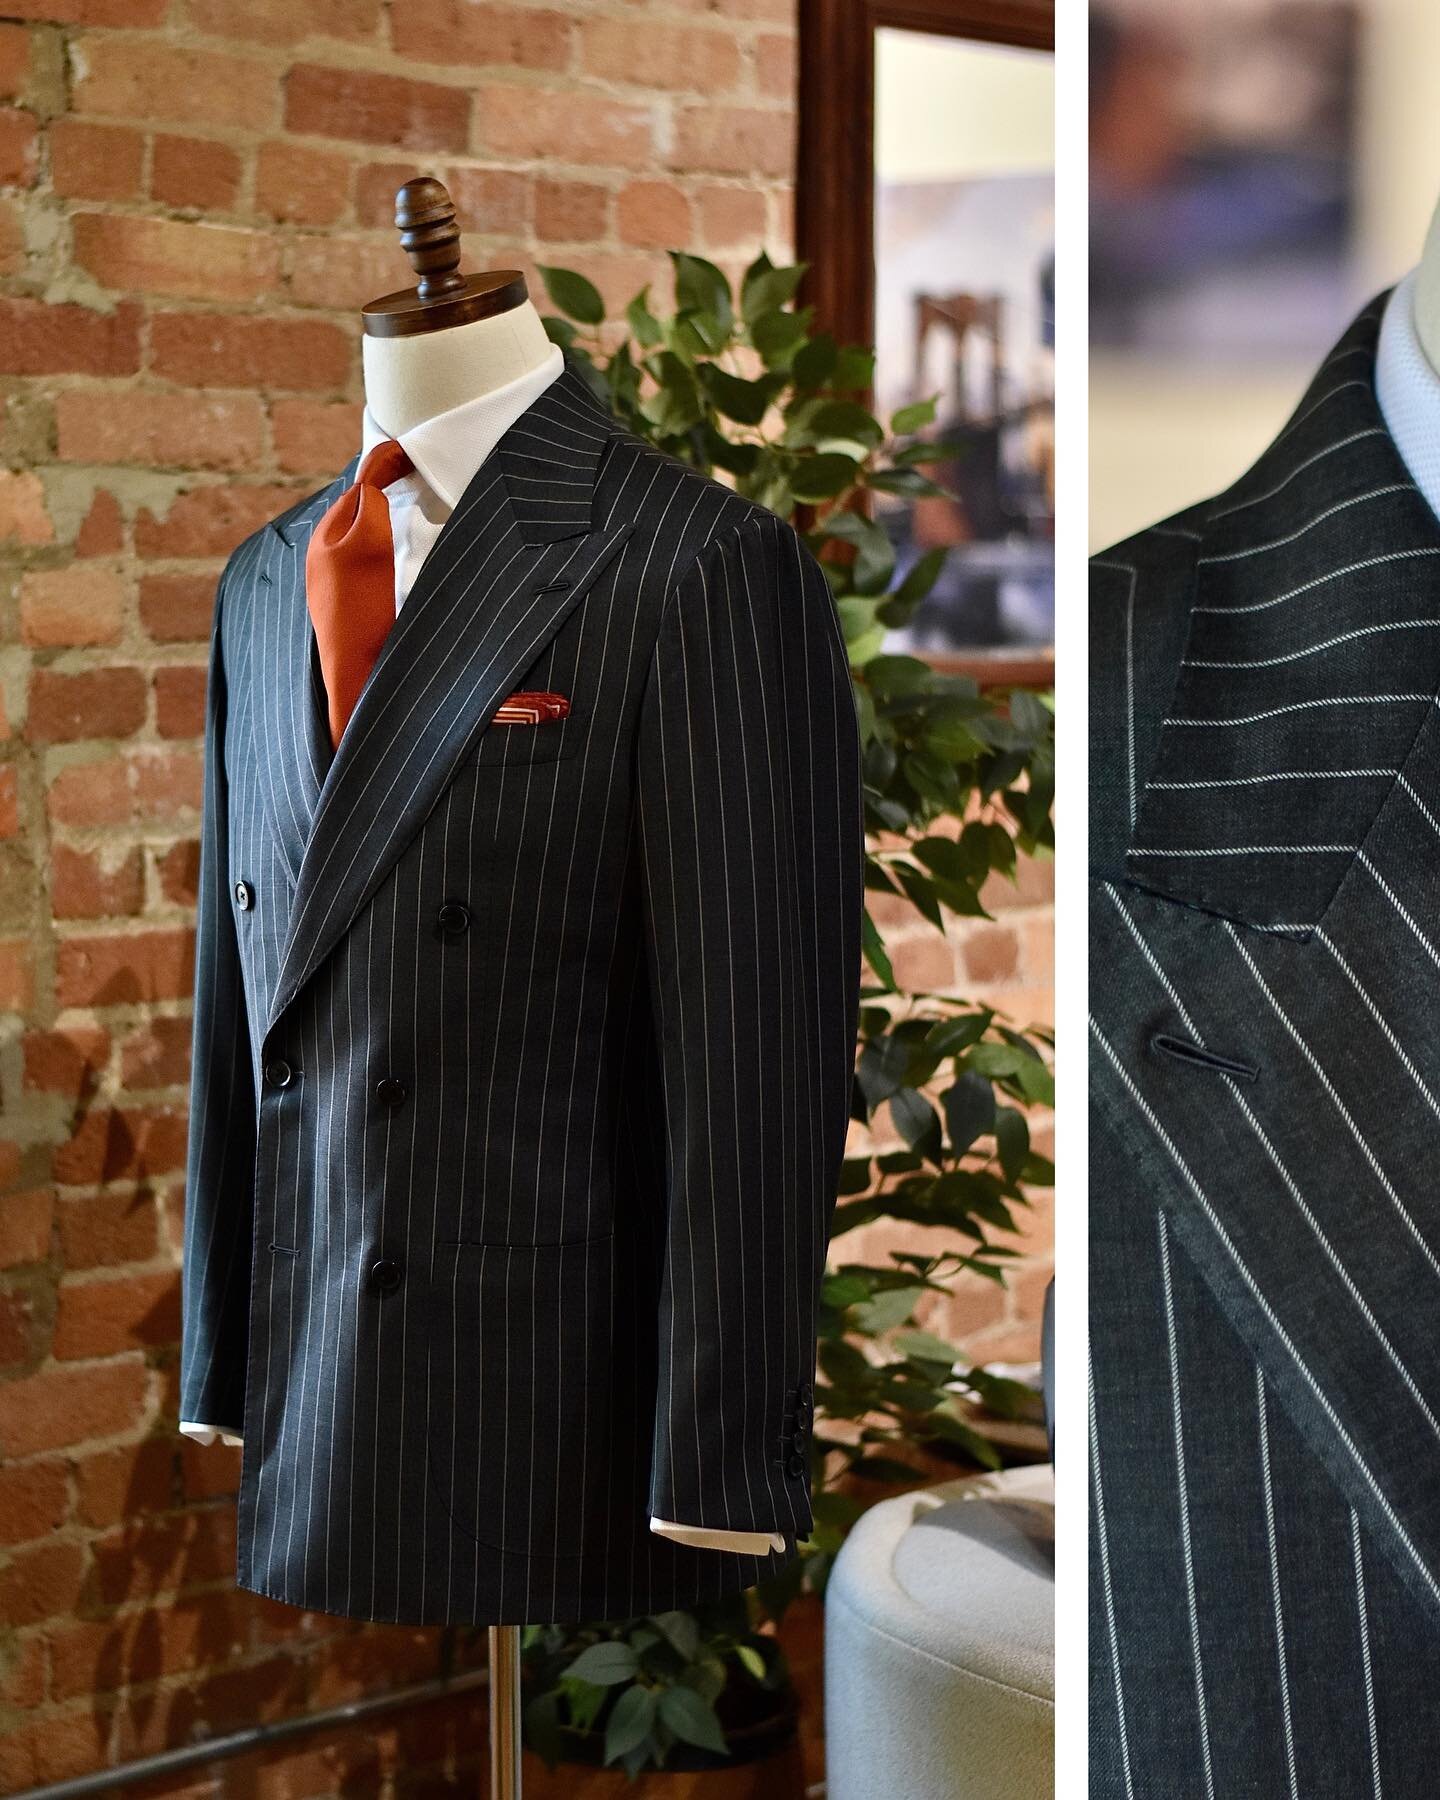 The pinstripe suit, a staple of menswear. This charcoal double breasted pinstripe paired with the orange tie &amp; a crisp white shirt is 👌. 

It&rsquo;s all in the details&hellip; notice the curved patch pockets &amp; Milanese buttonhole 👀

#ascen